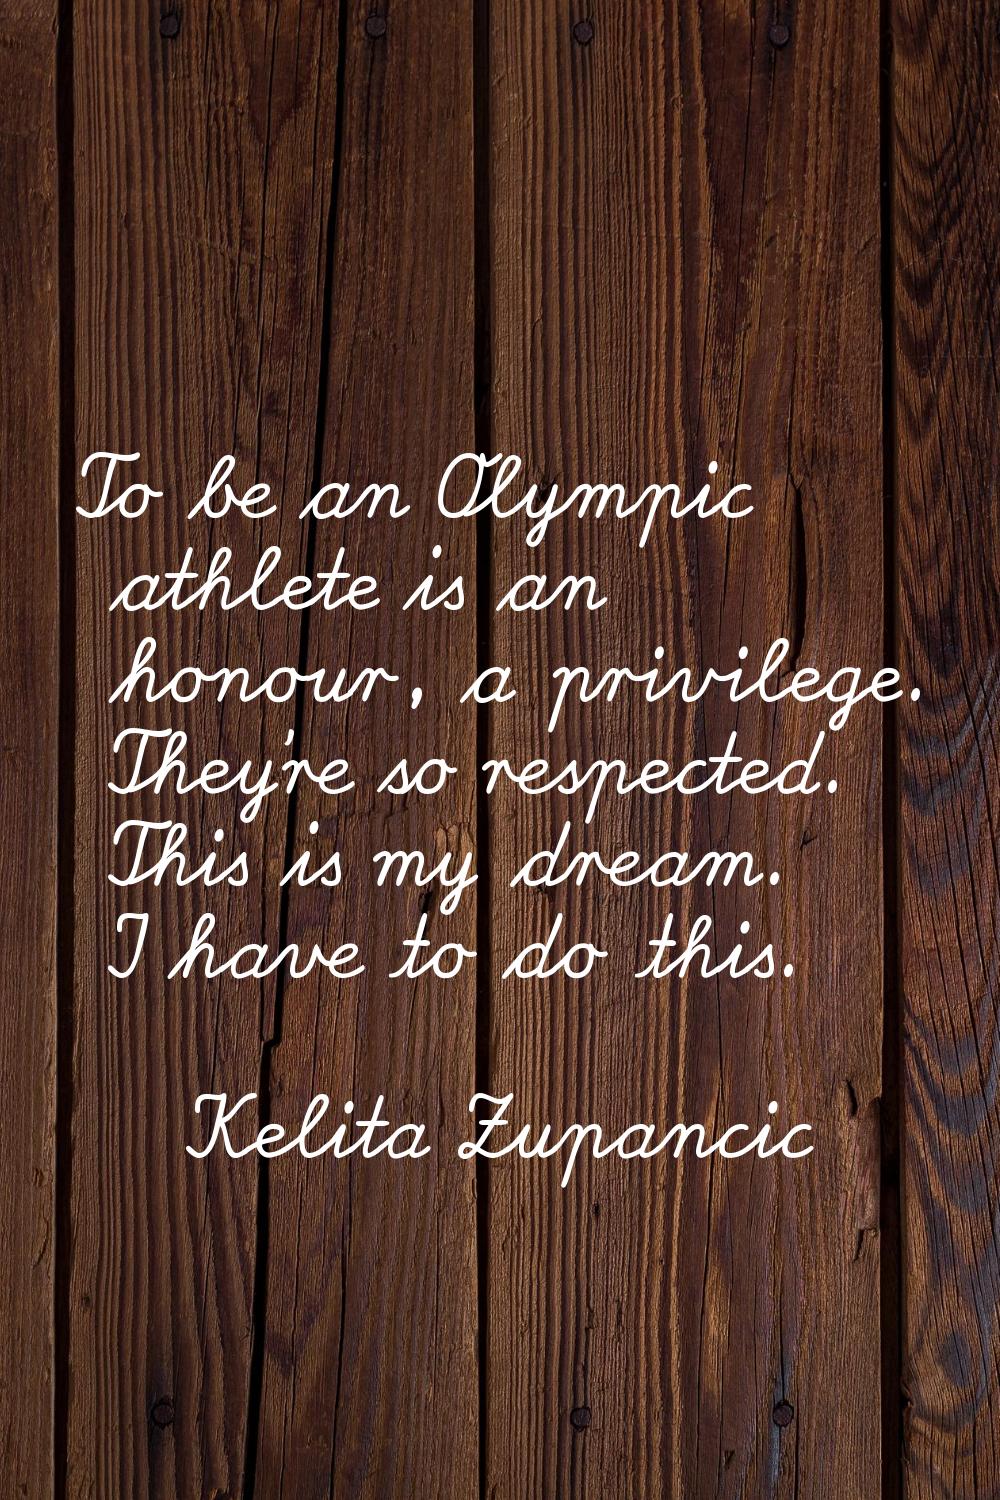 To be an Olympic athlete is an honour, a privilege. They're so respected. This is my dream. I have 